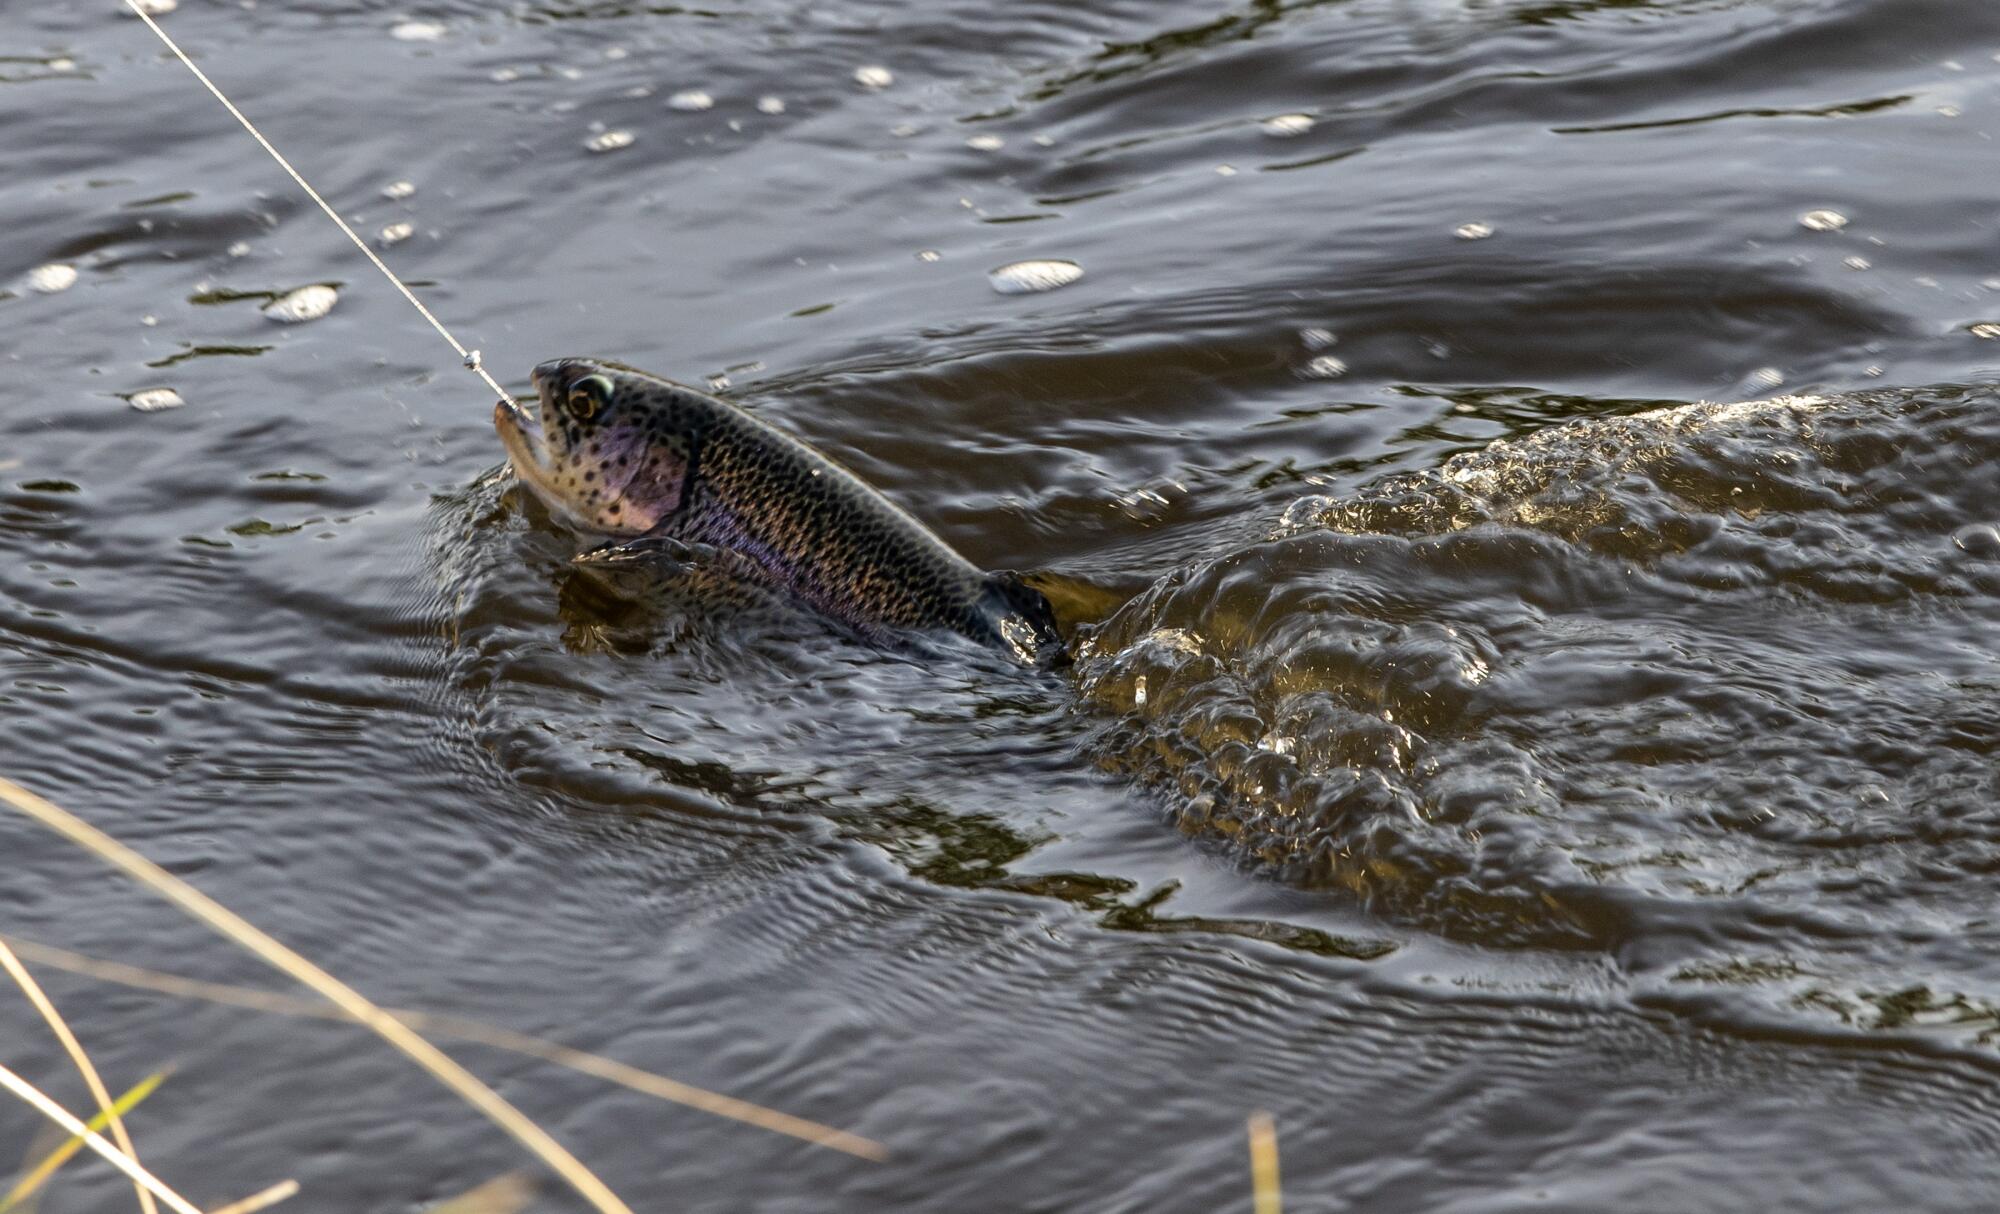 A trout is caught in a stream